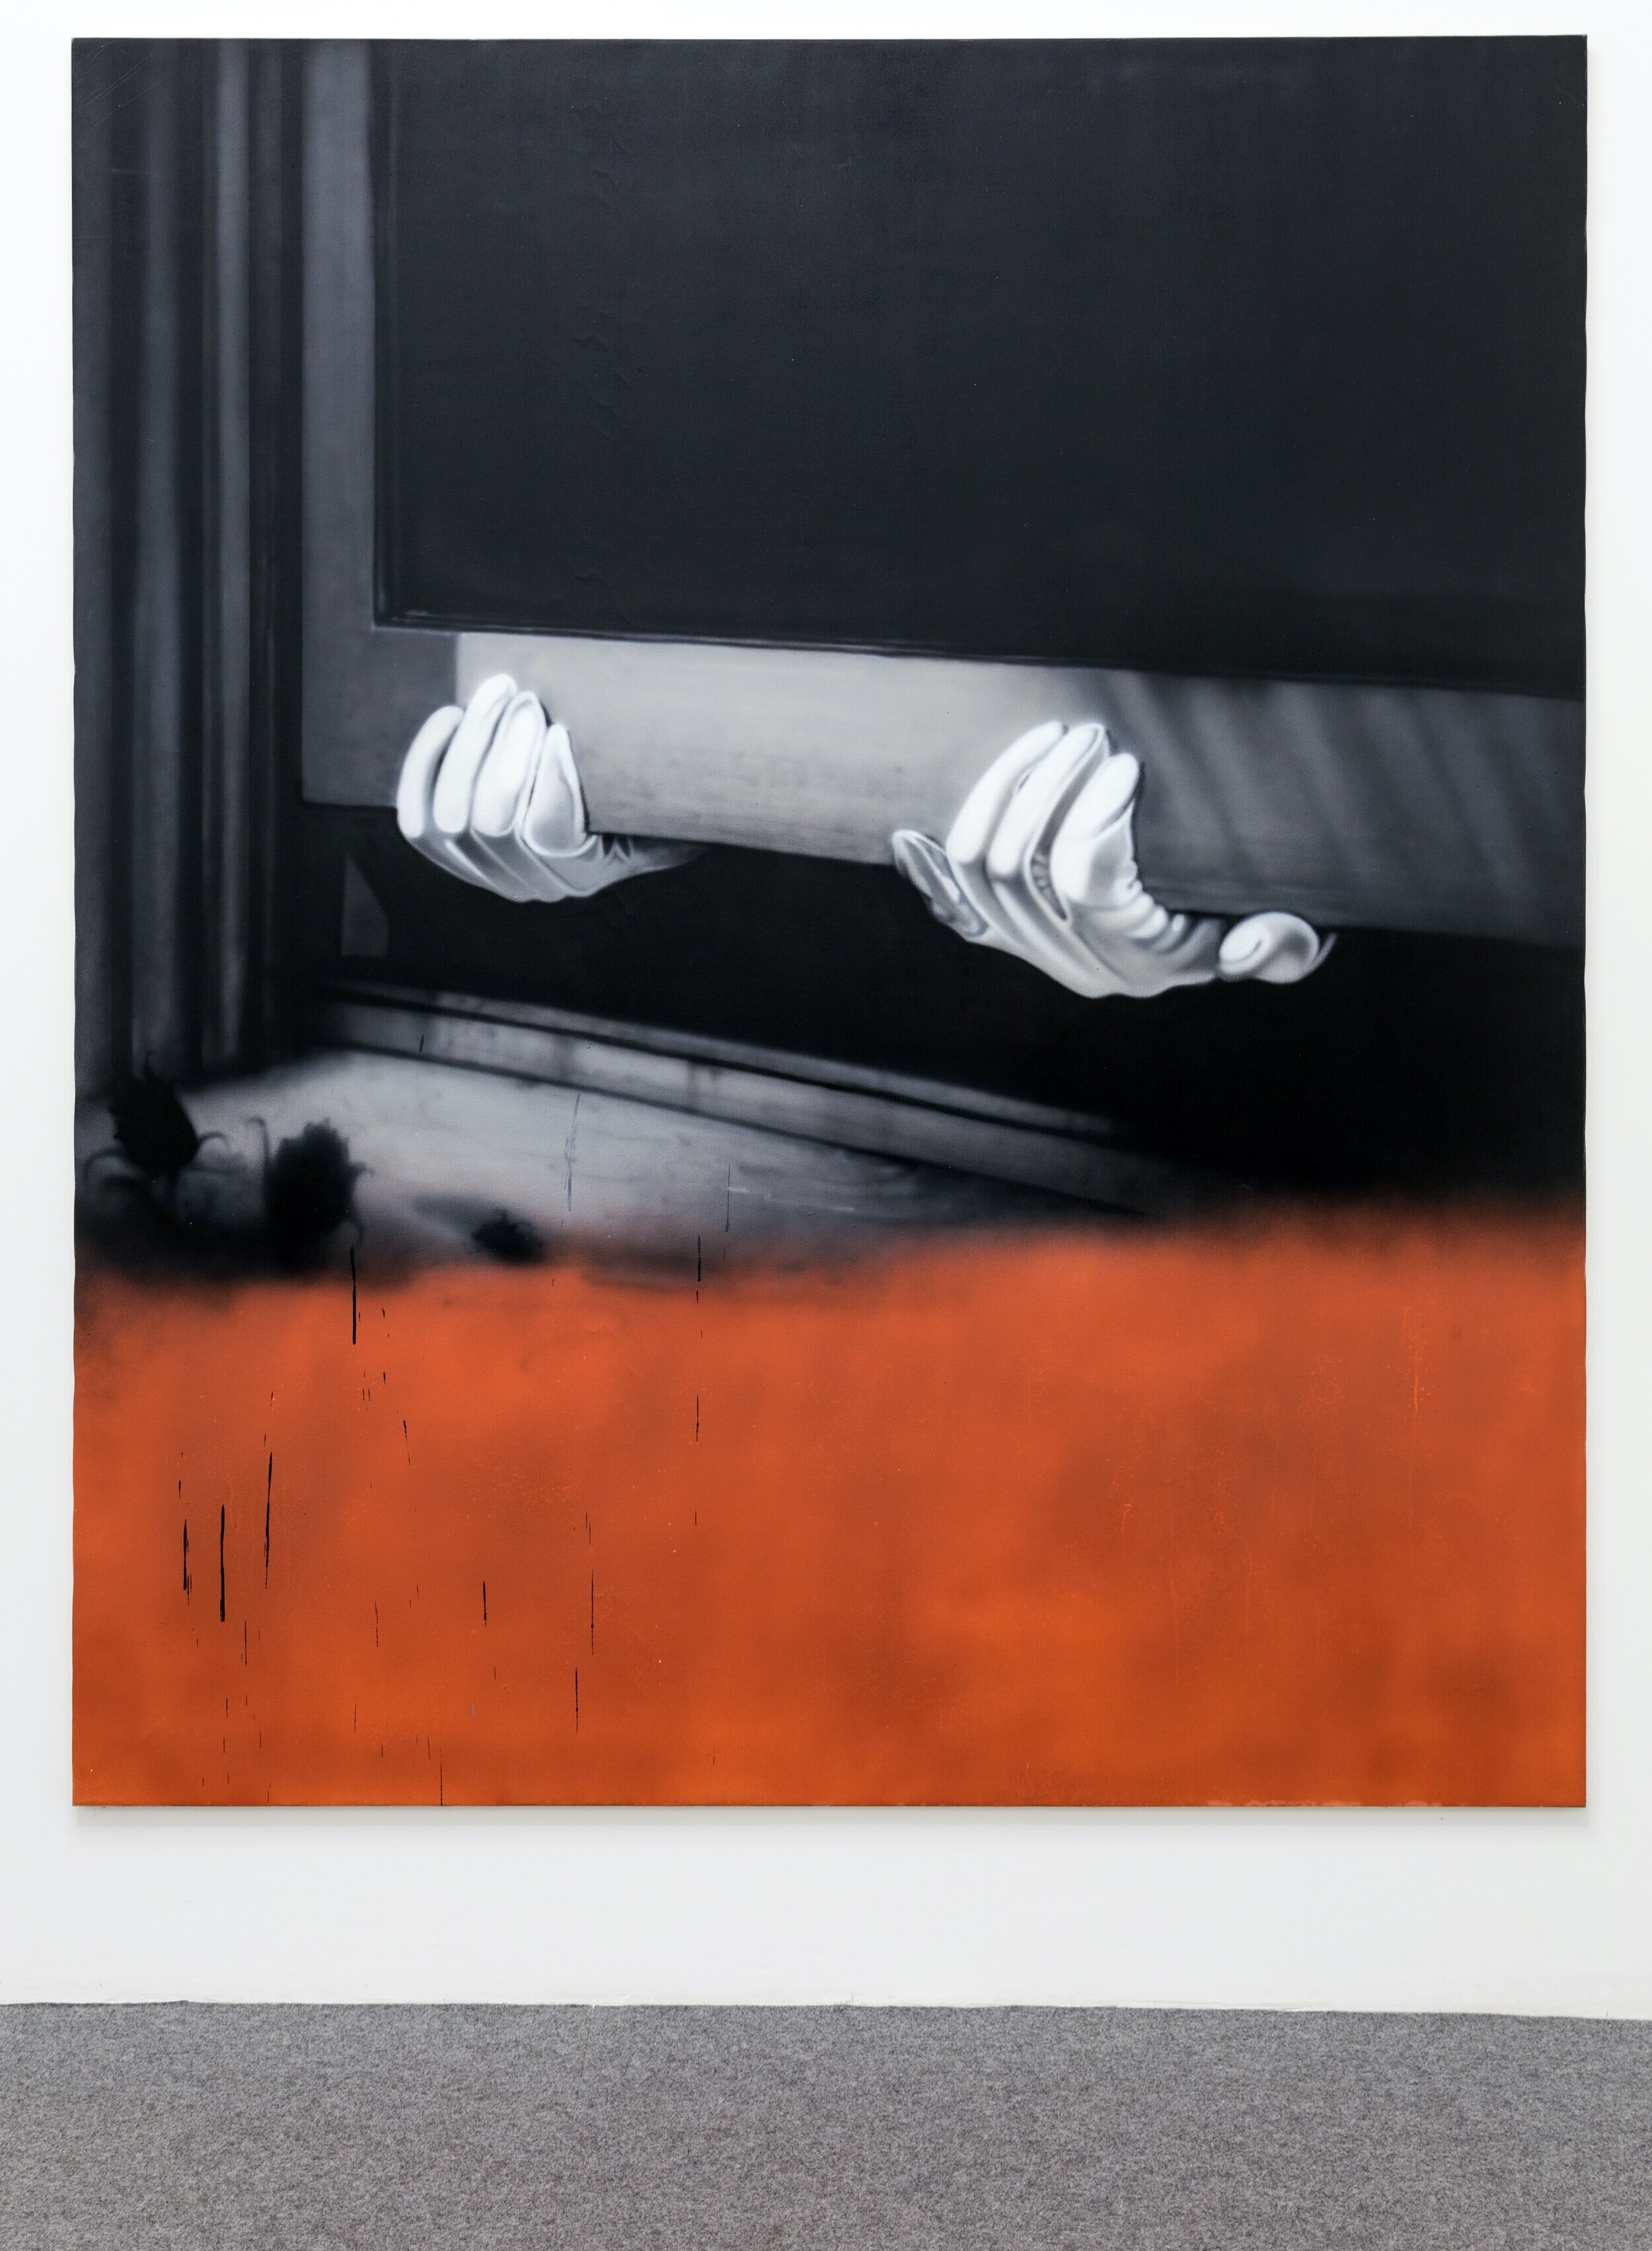   Thief Painting in Black and White and Red Oxide,  2015. Acrylic on canvas. 84 x 73 inches 